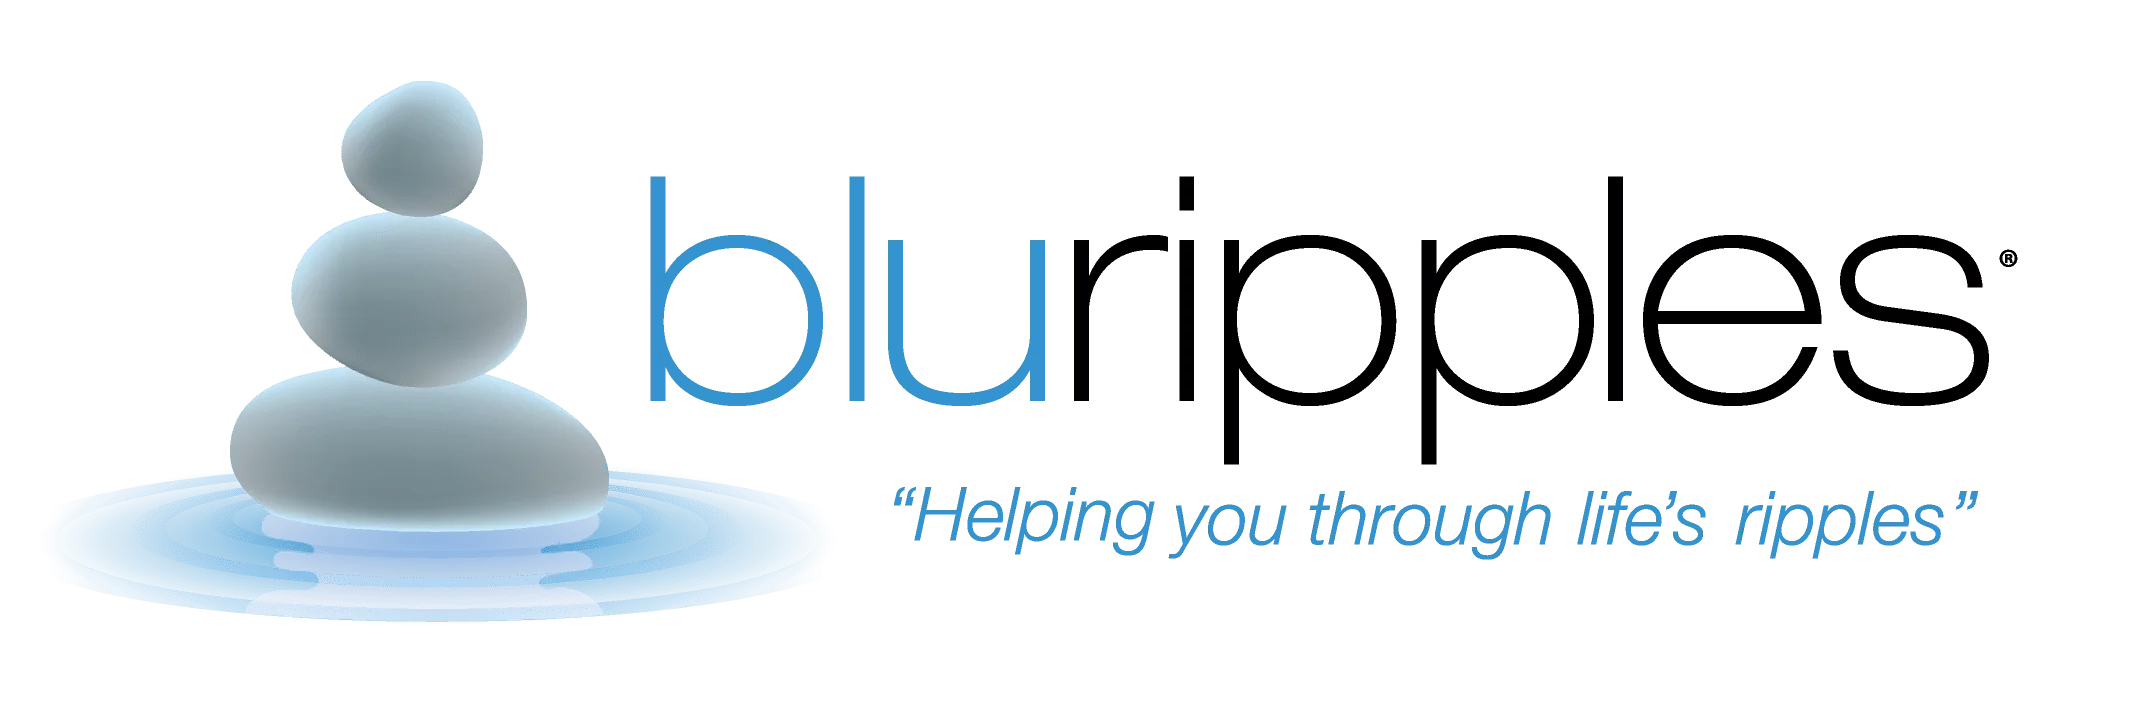 Blu Ripples - Career Counselling and Career Consulting Services 